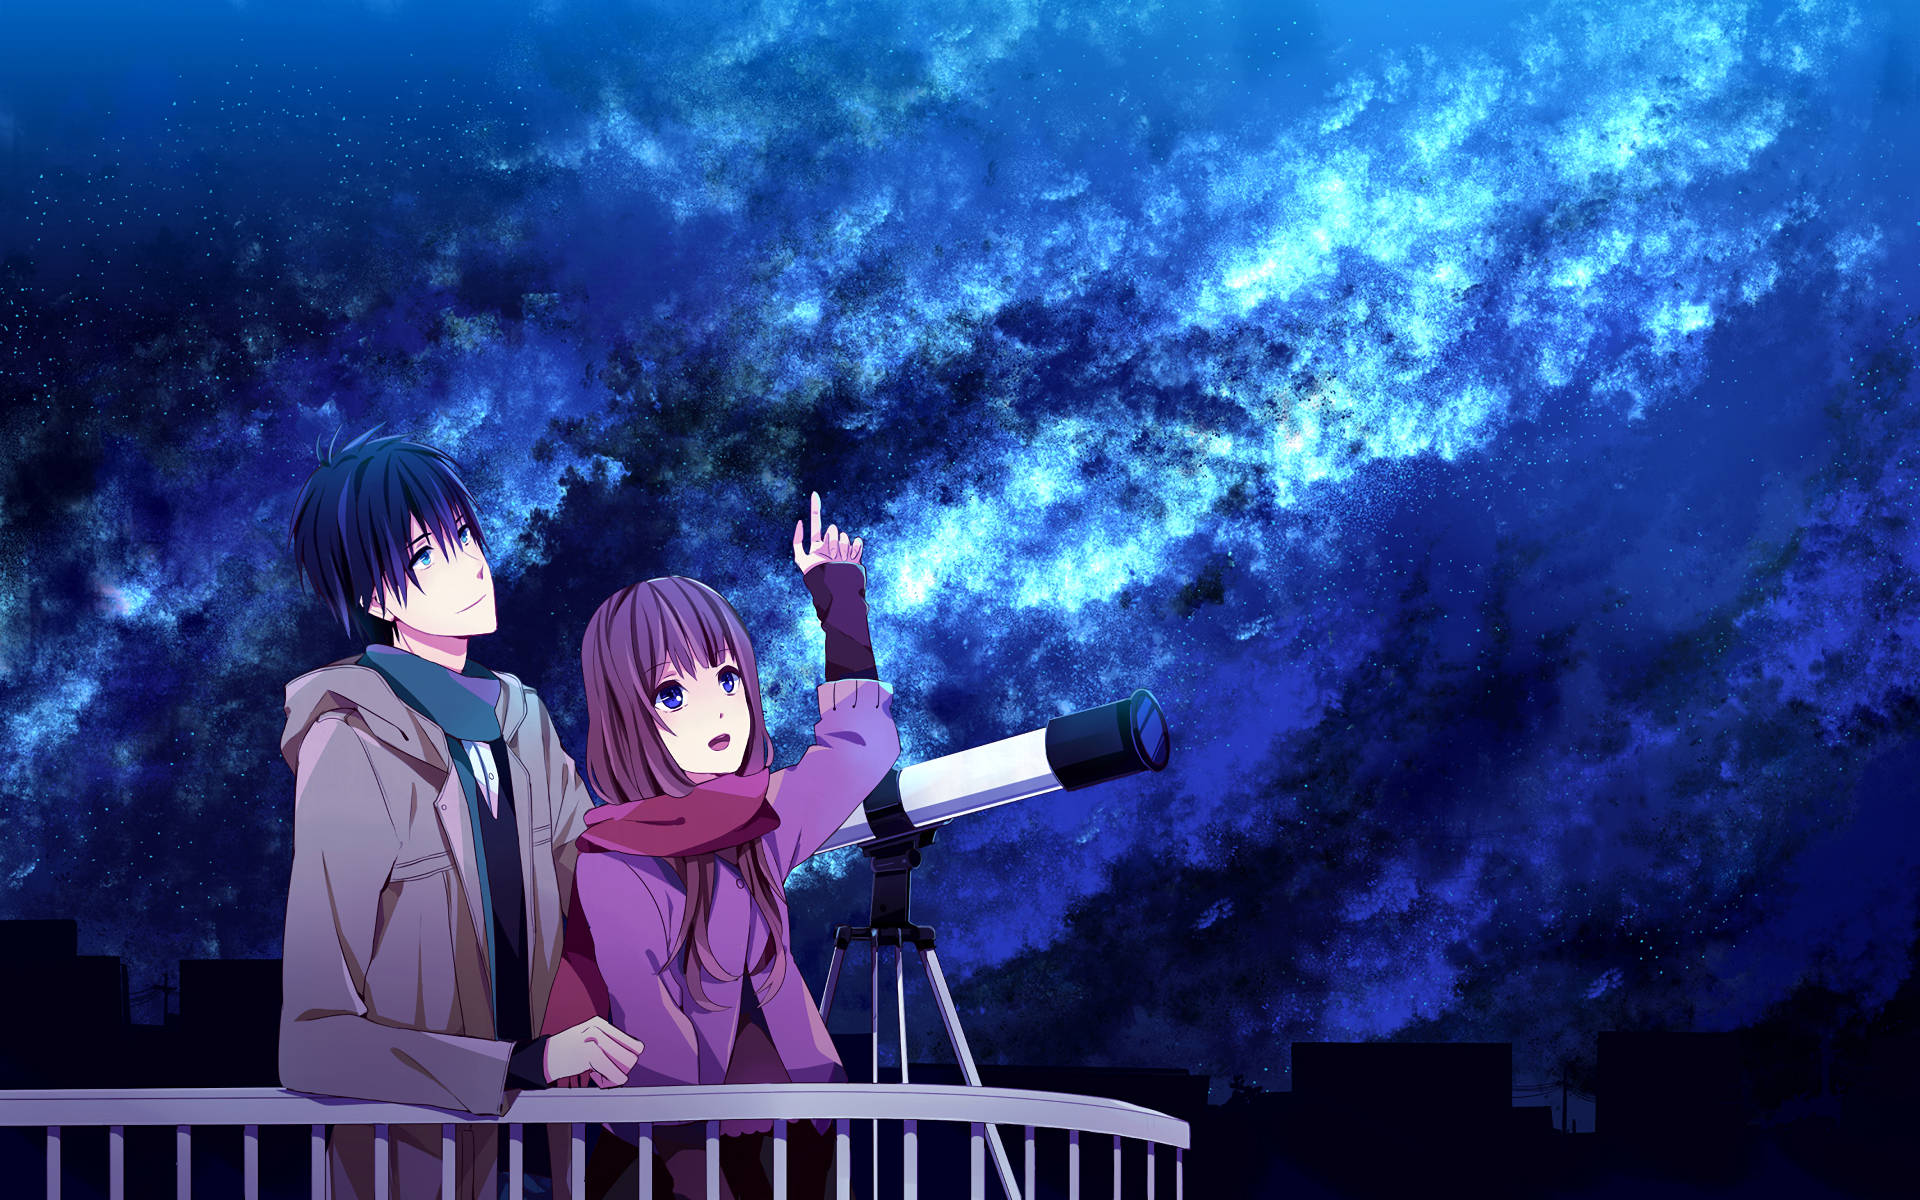 Download Anime Couple Stargazing With A Telescope Wallpaper ...